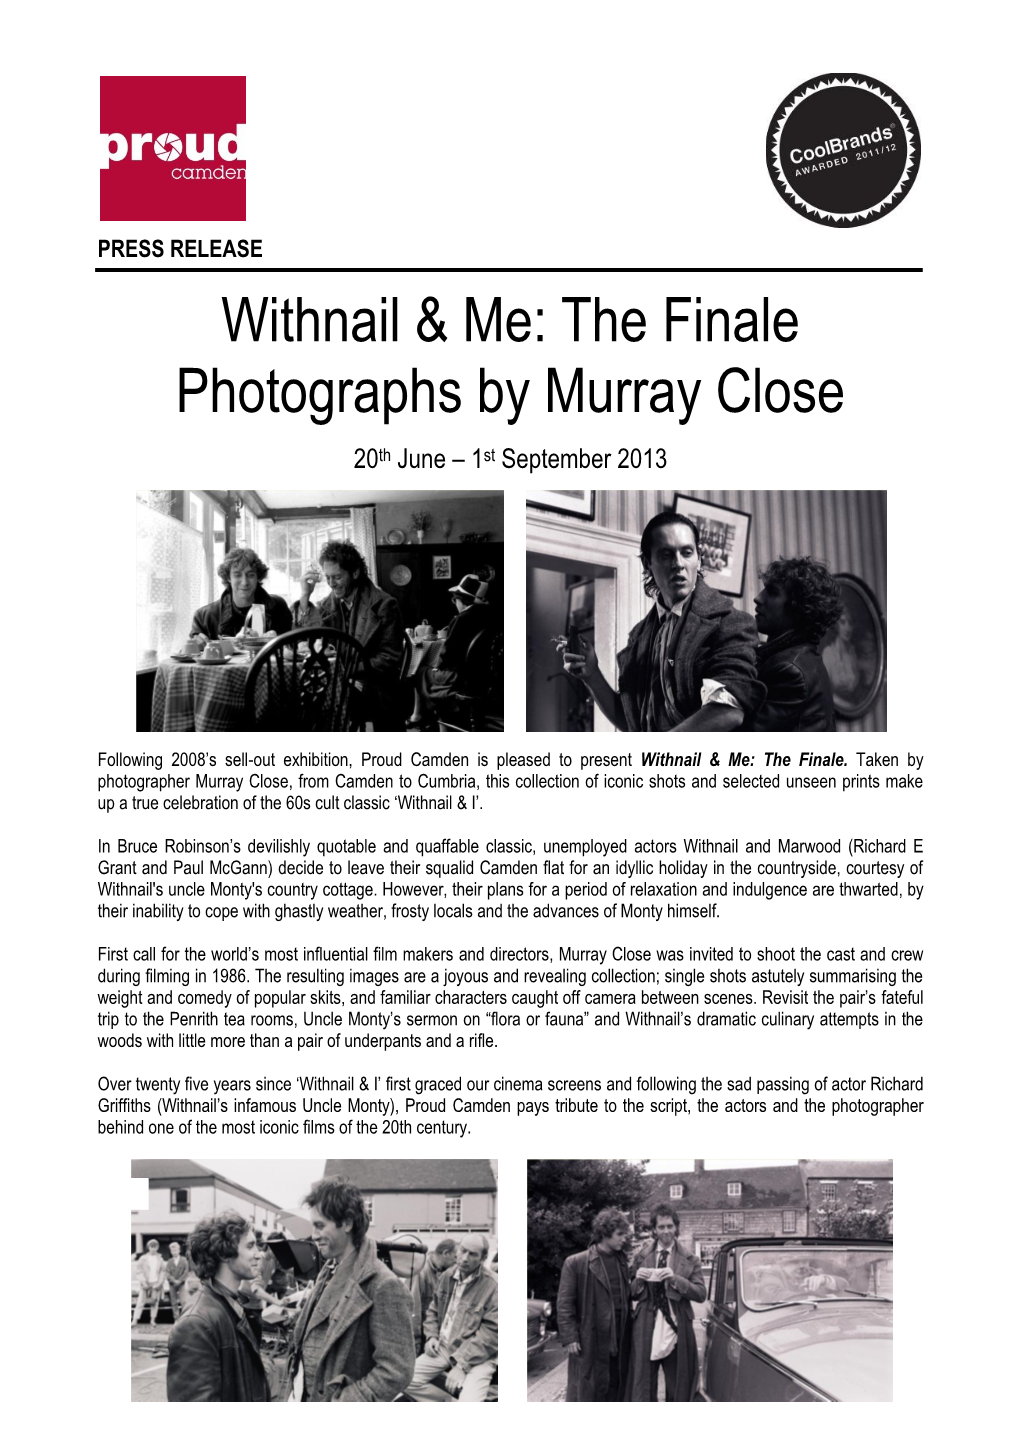 Withnail & Me: the Finale Photographs by Murray Close